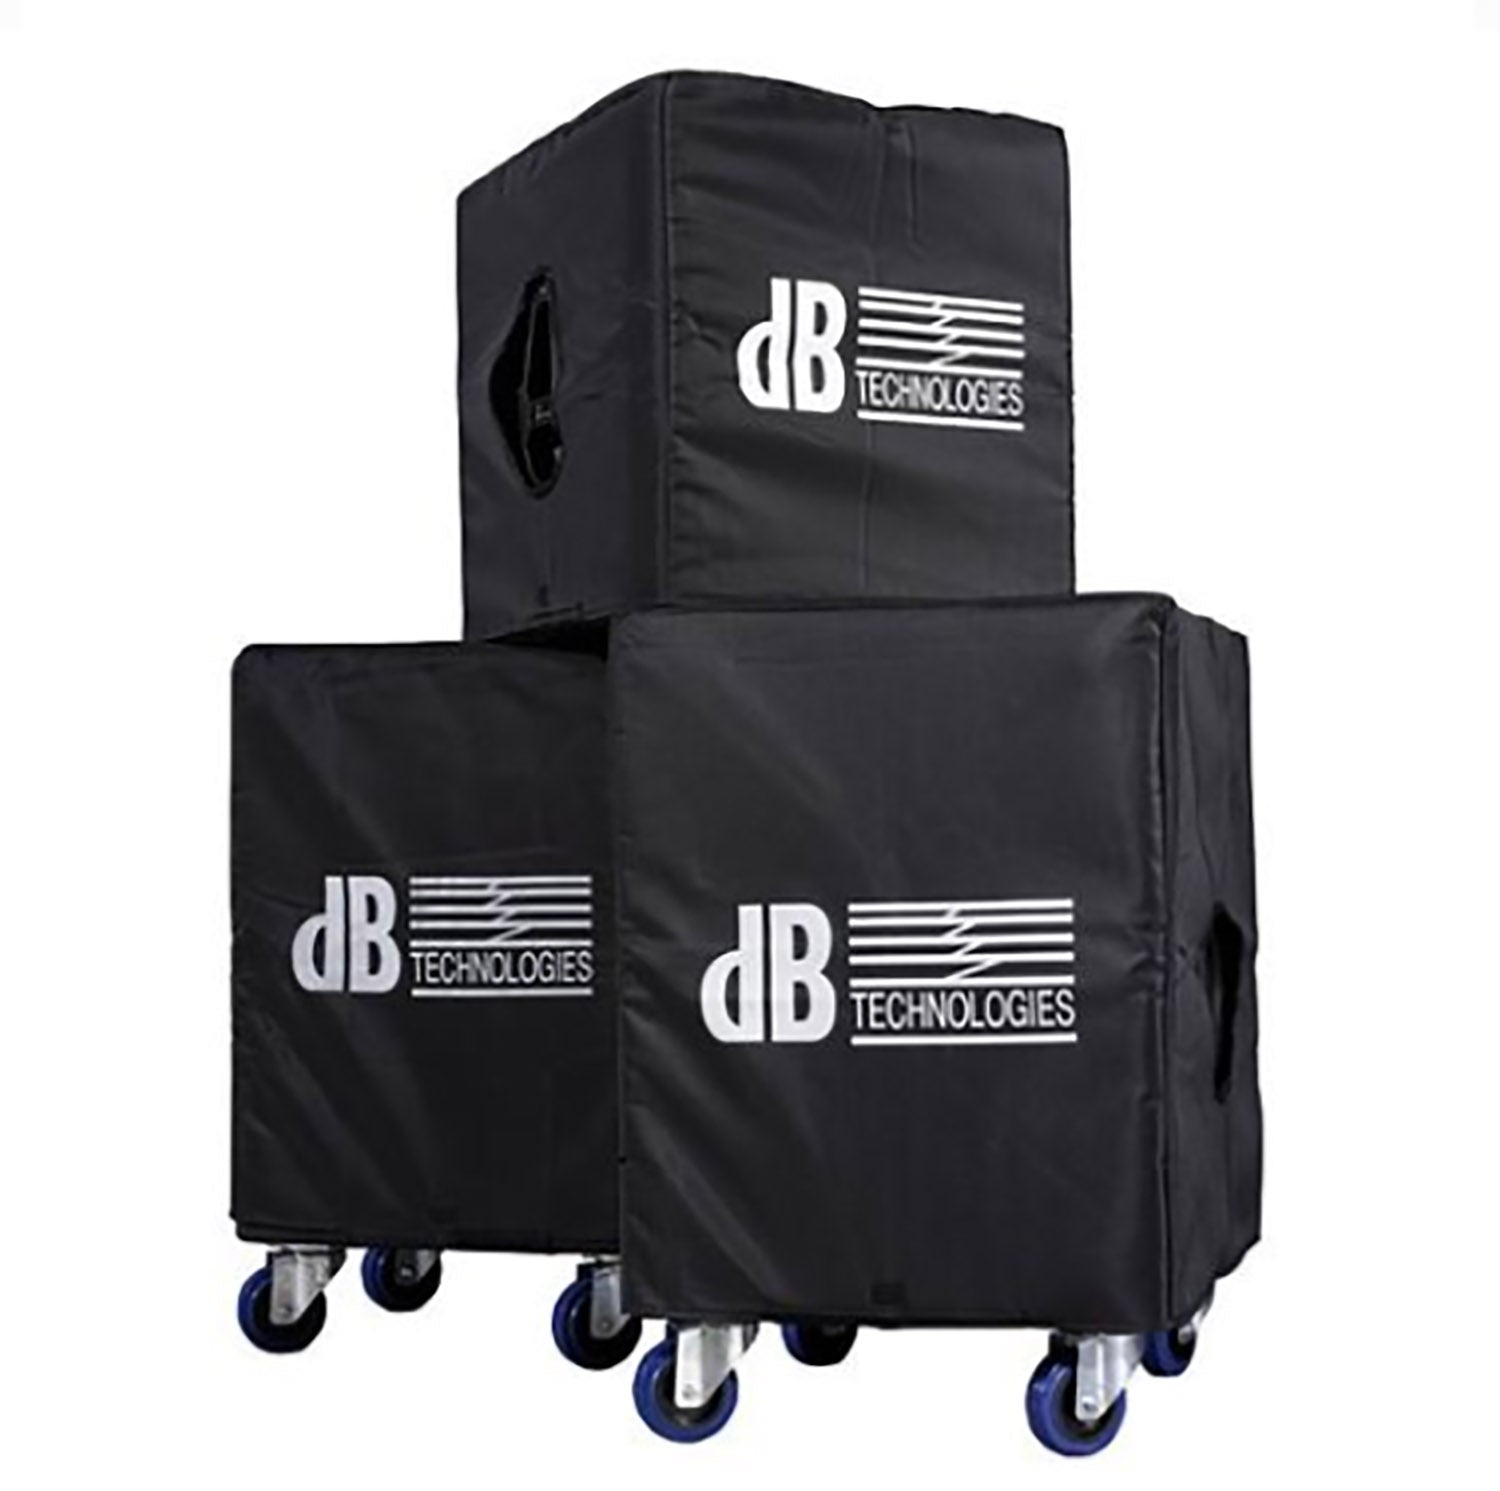 dB Technologies TC 20S/TC 30S Transport Cover for DVA S20 DP and S30N - Hollywood DJ